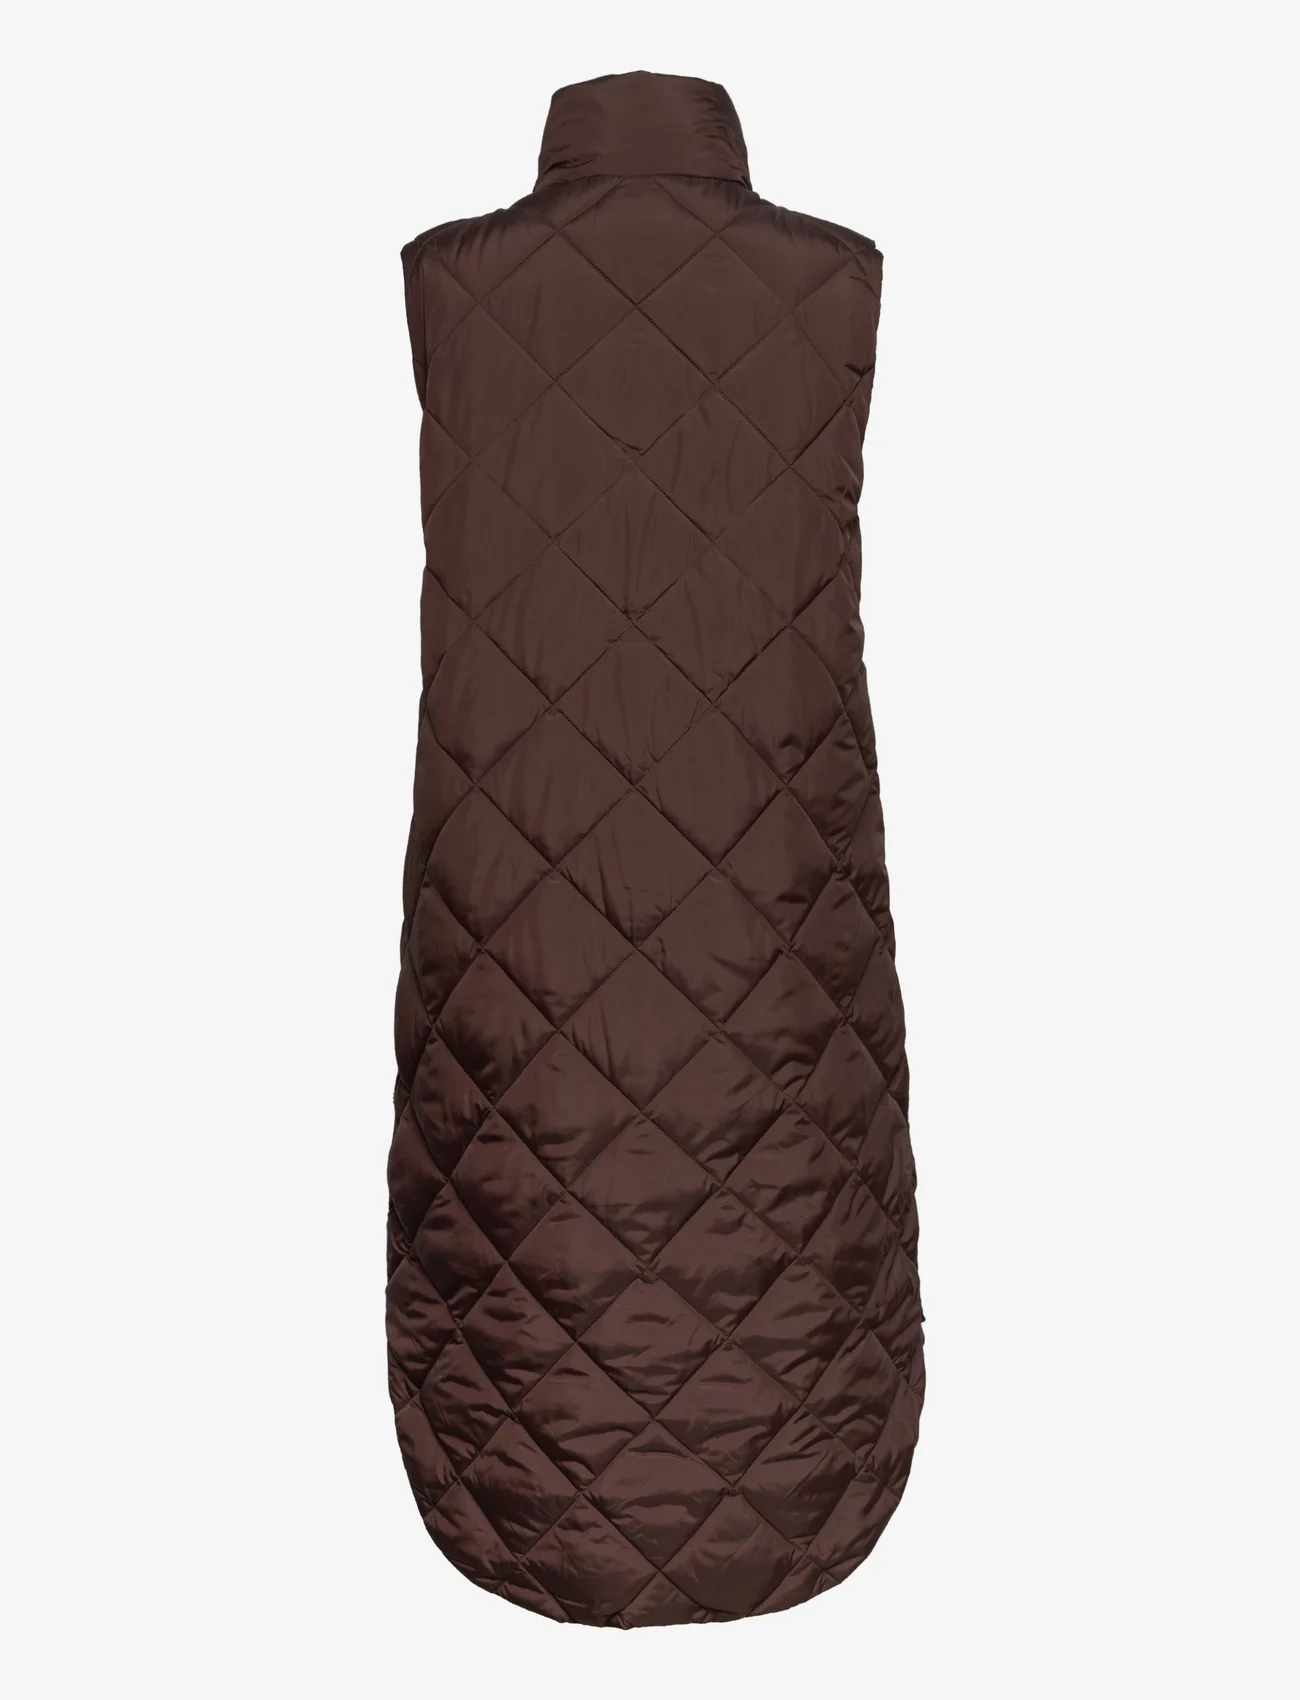 FREE/QUENT - FQOLGA-WA - quilted vests - coffee bean - 1